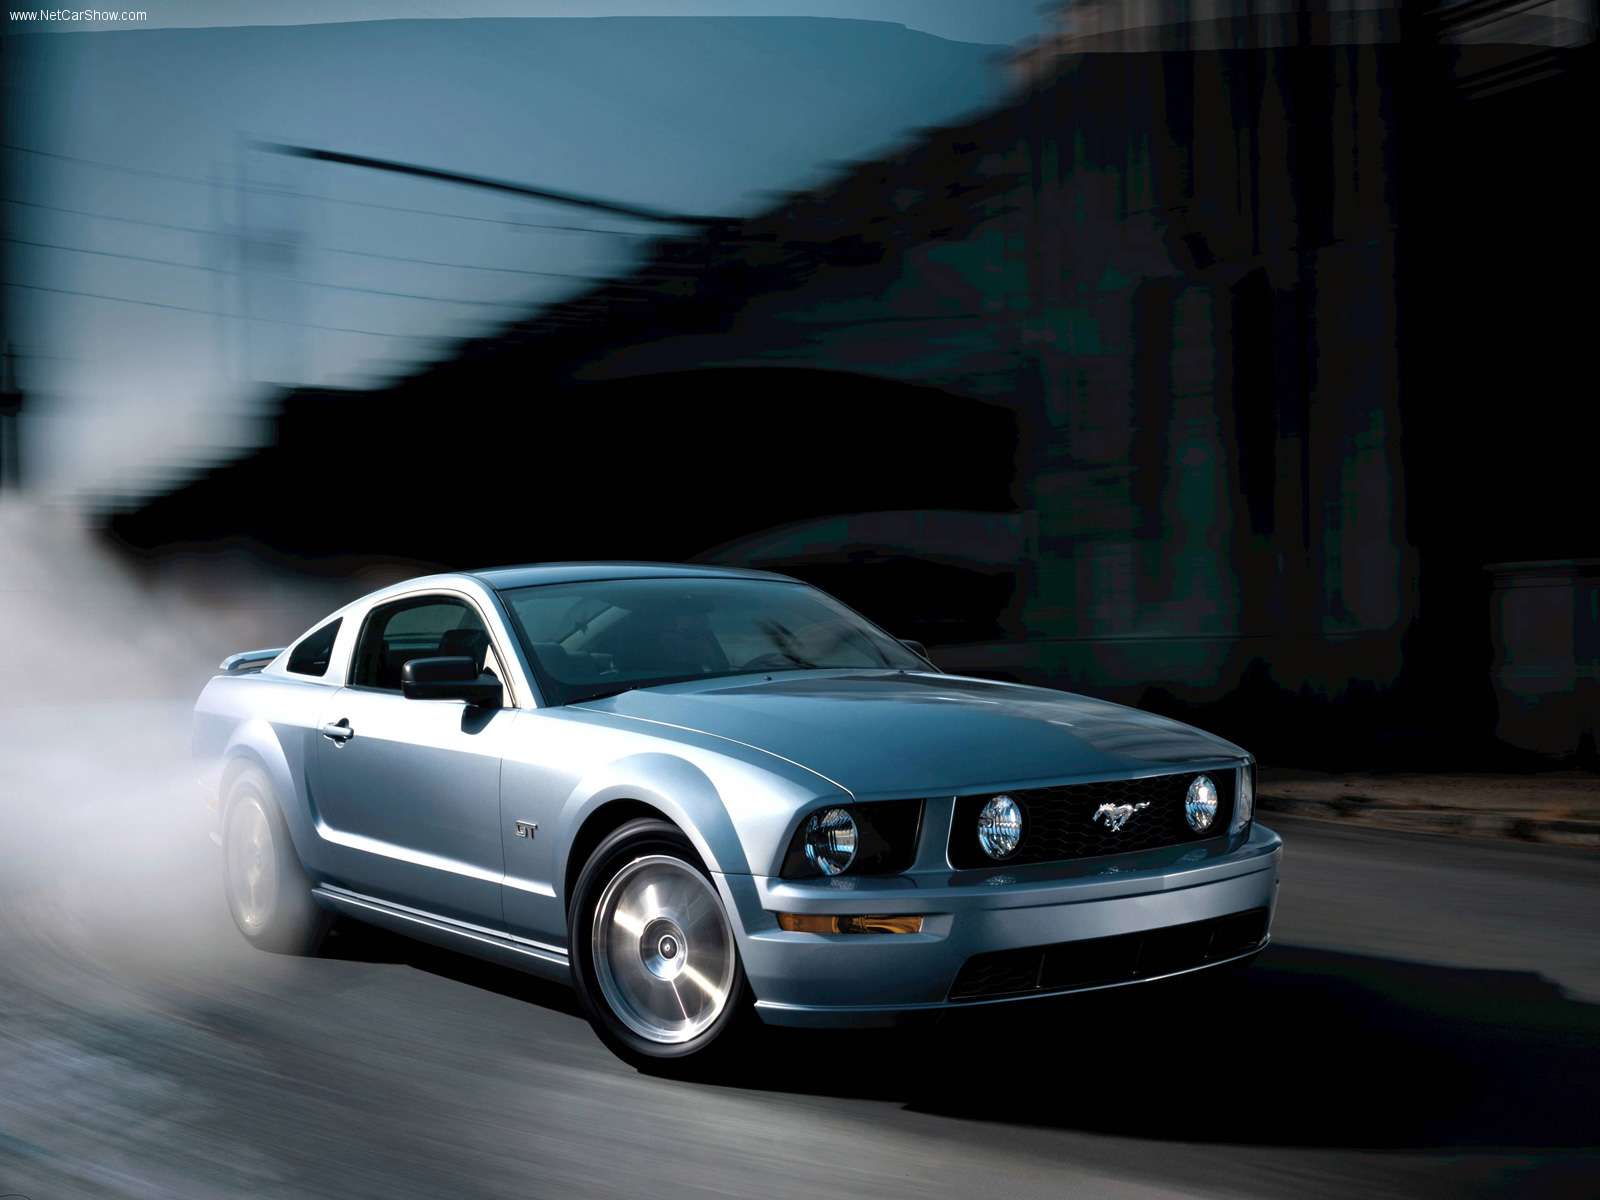 Ford Mustang GT Wallpaper. Ford Mustang GT Background